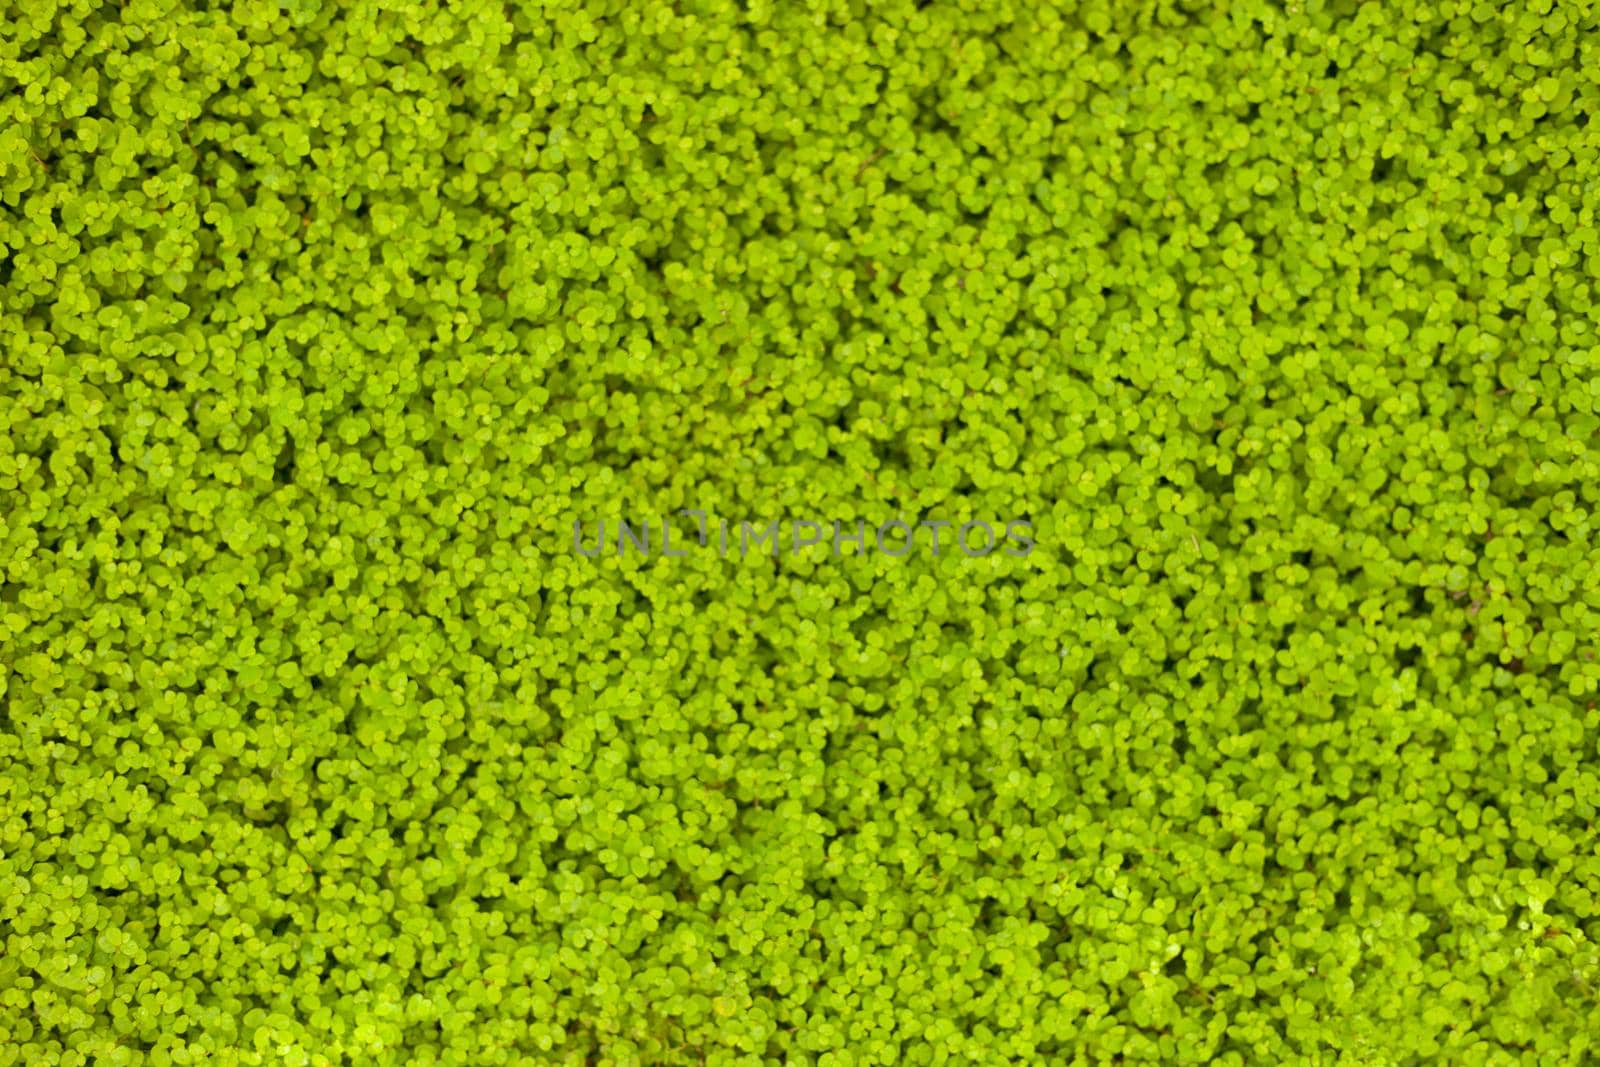 blurred grass image top view for background or wallpaper. Green leaves backdrop. Foliage. Top view. No focus. Nature background. Close up.